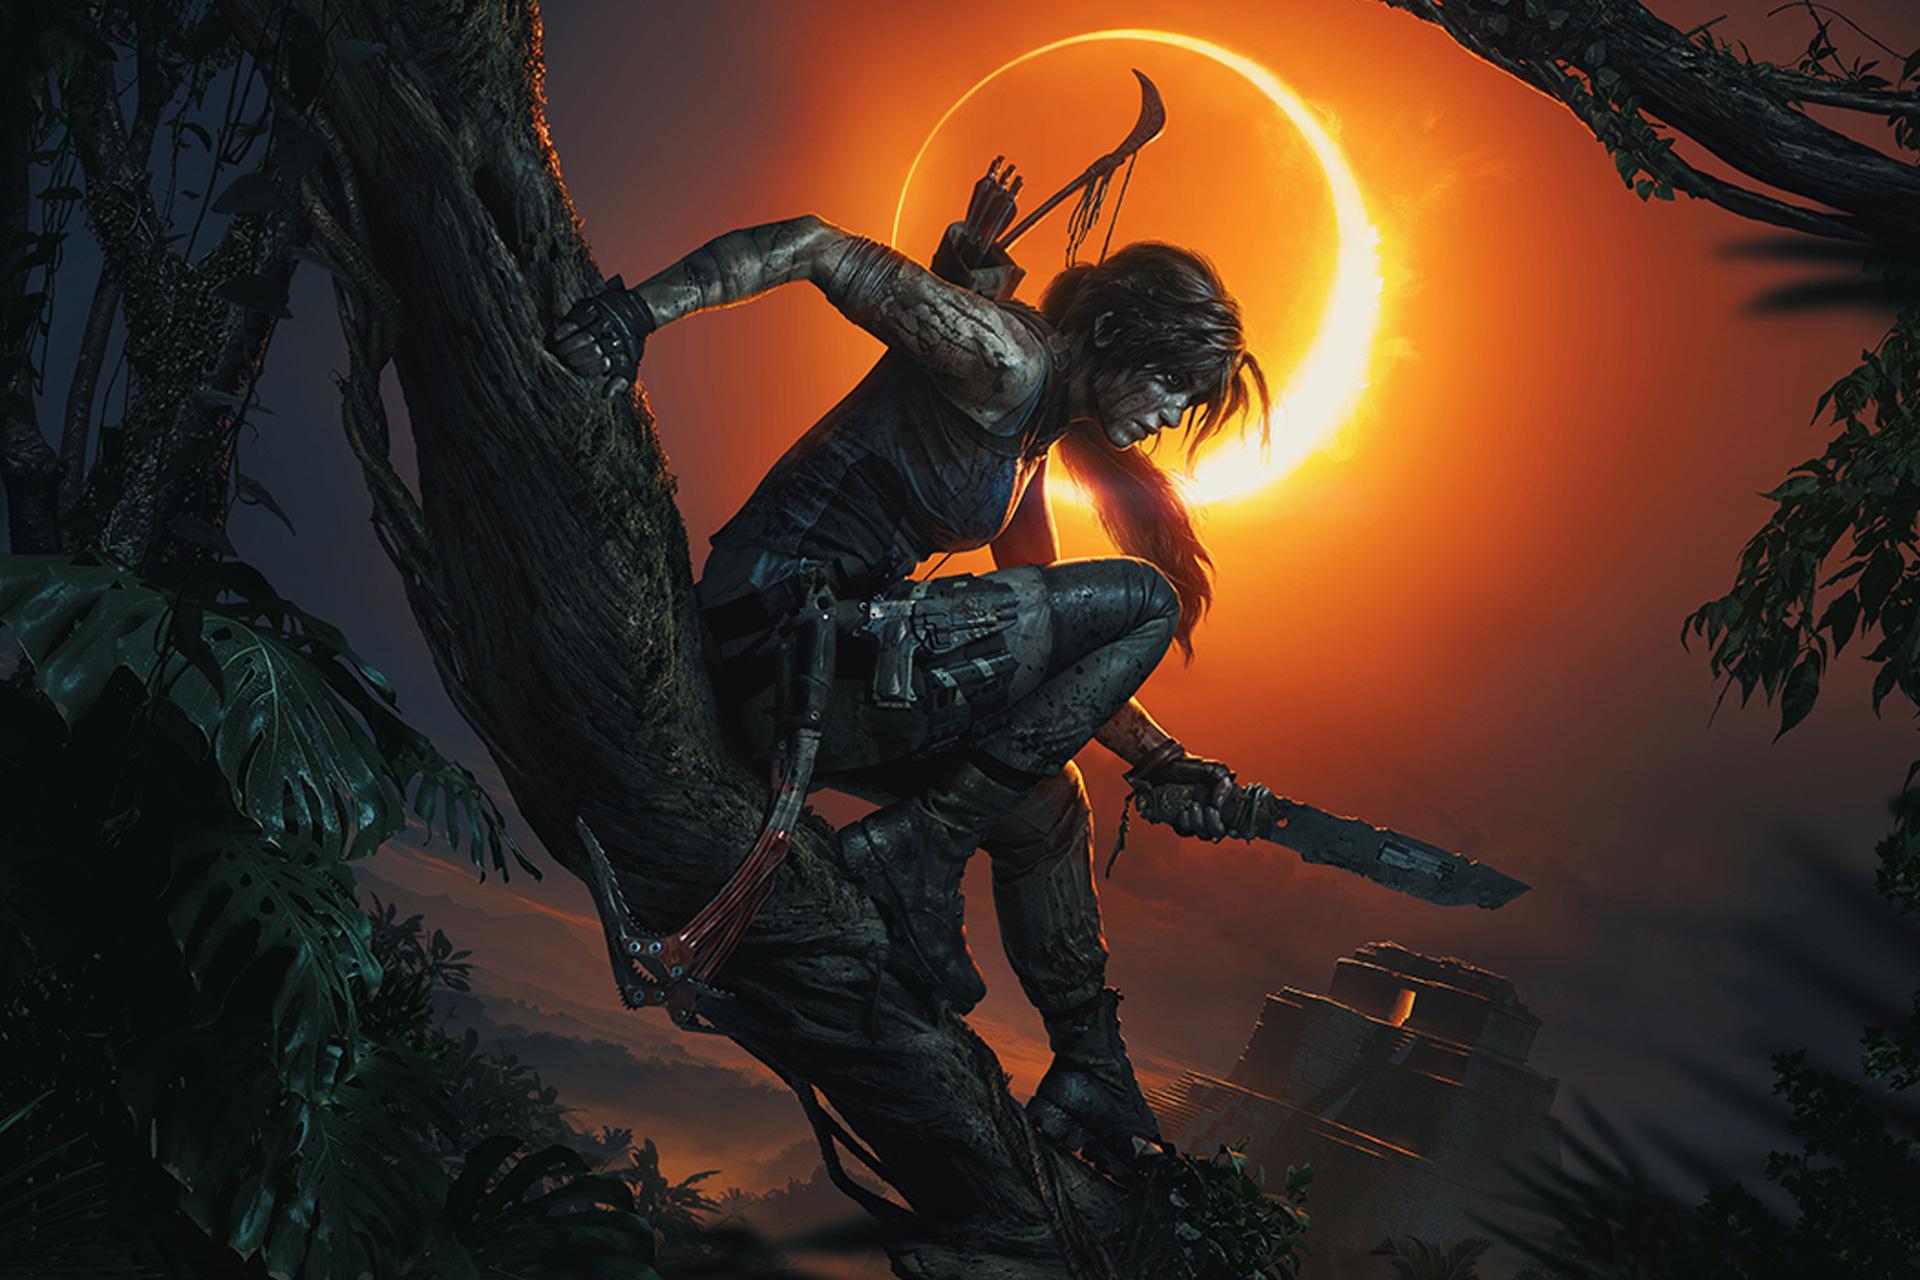 Lara Croft sitting on a tree in front of an eclipse with a glowing orange sky in the background.